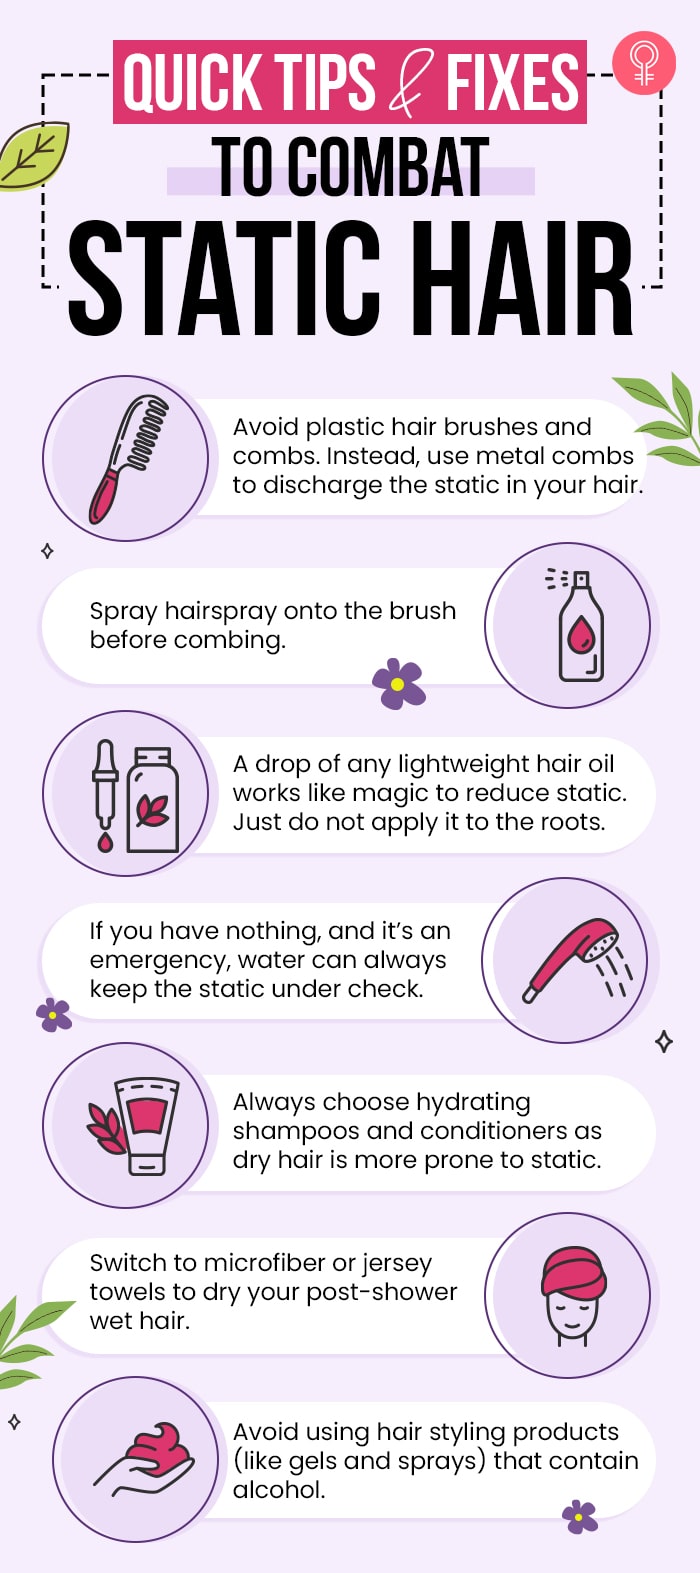 Short hints And Fixes To fight Static Hair